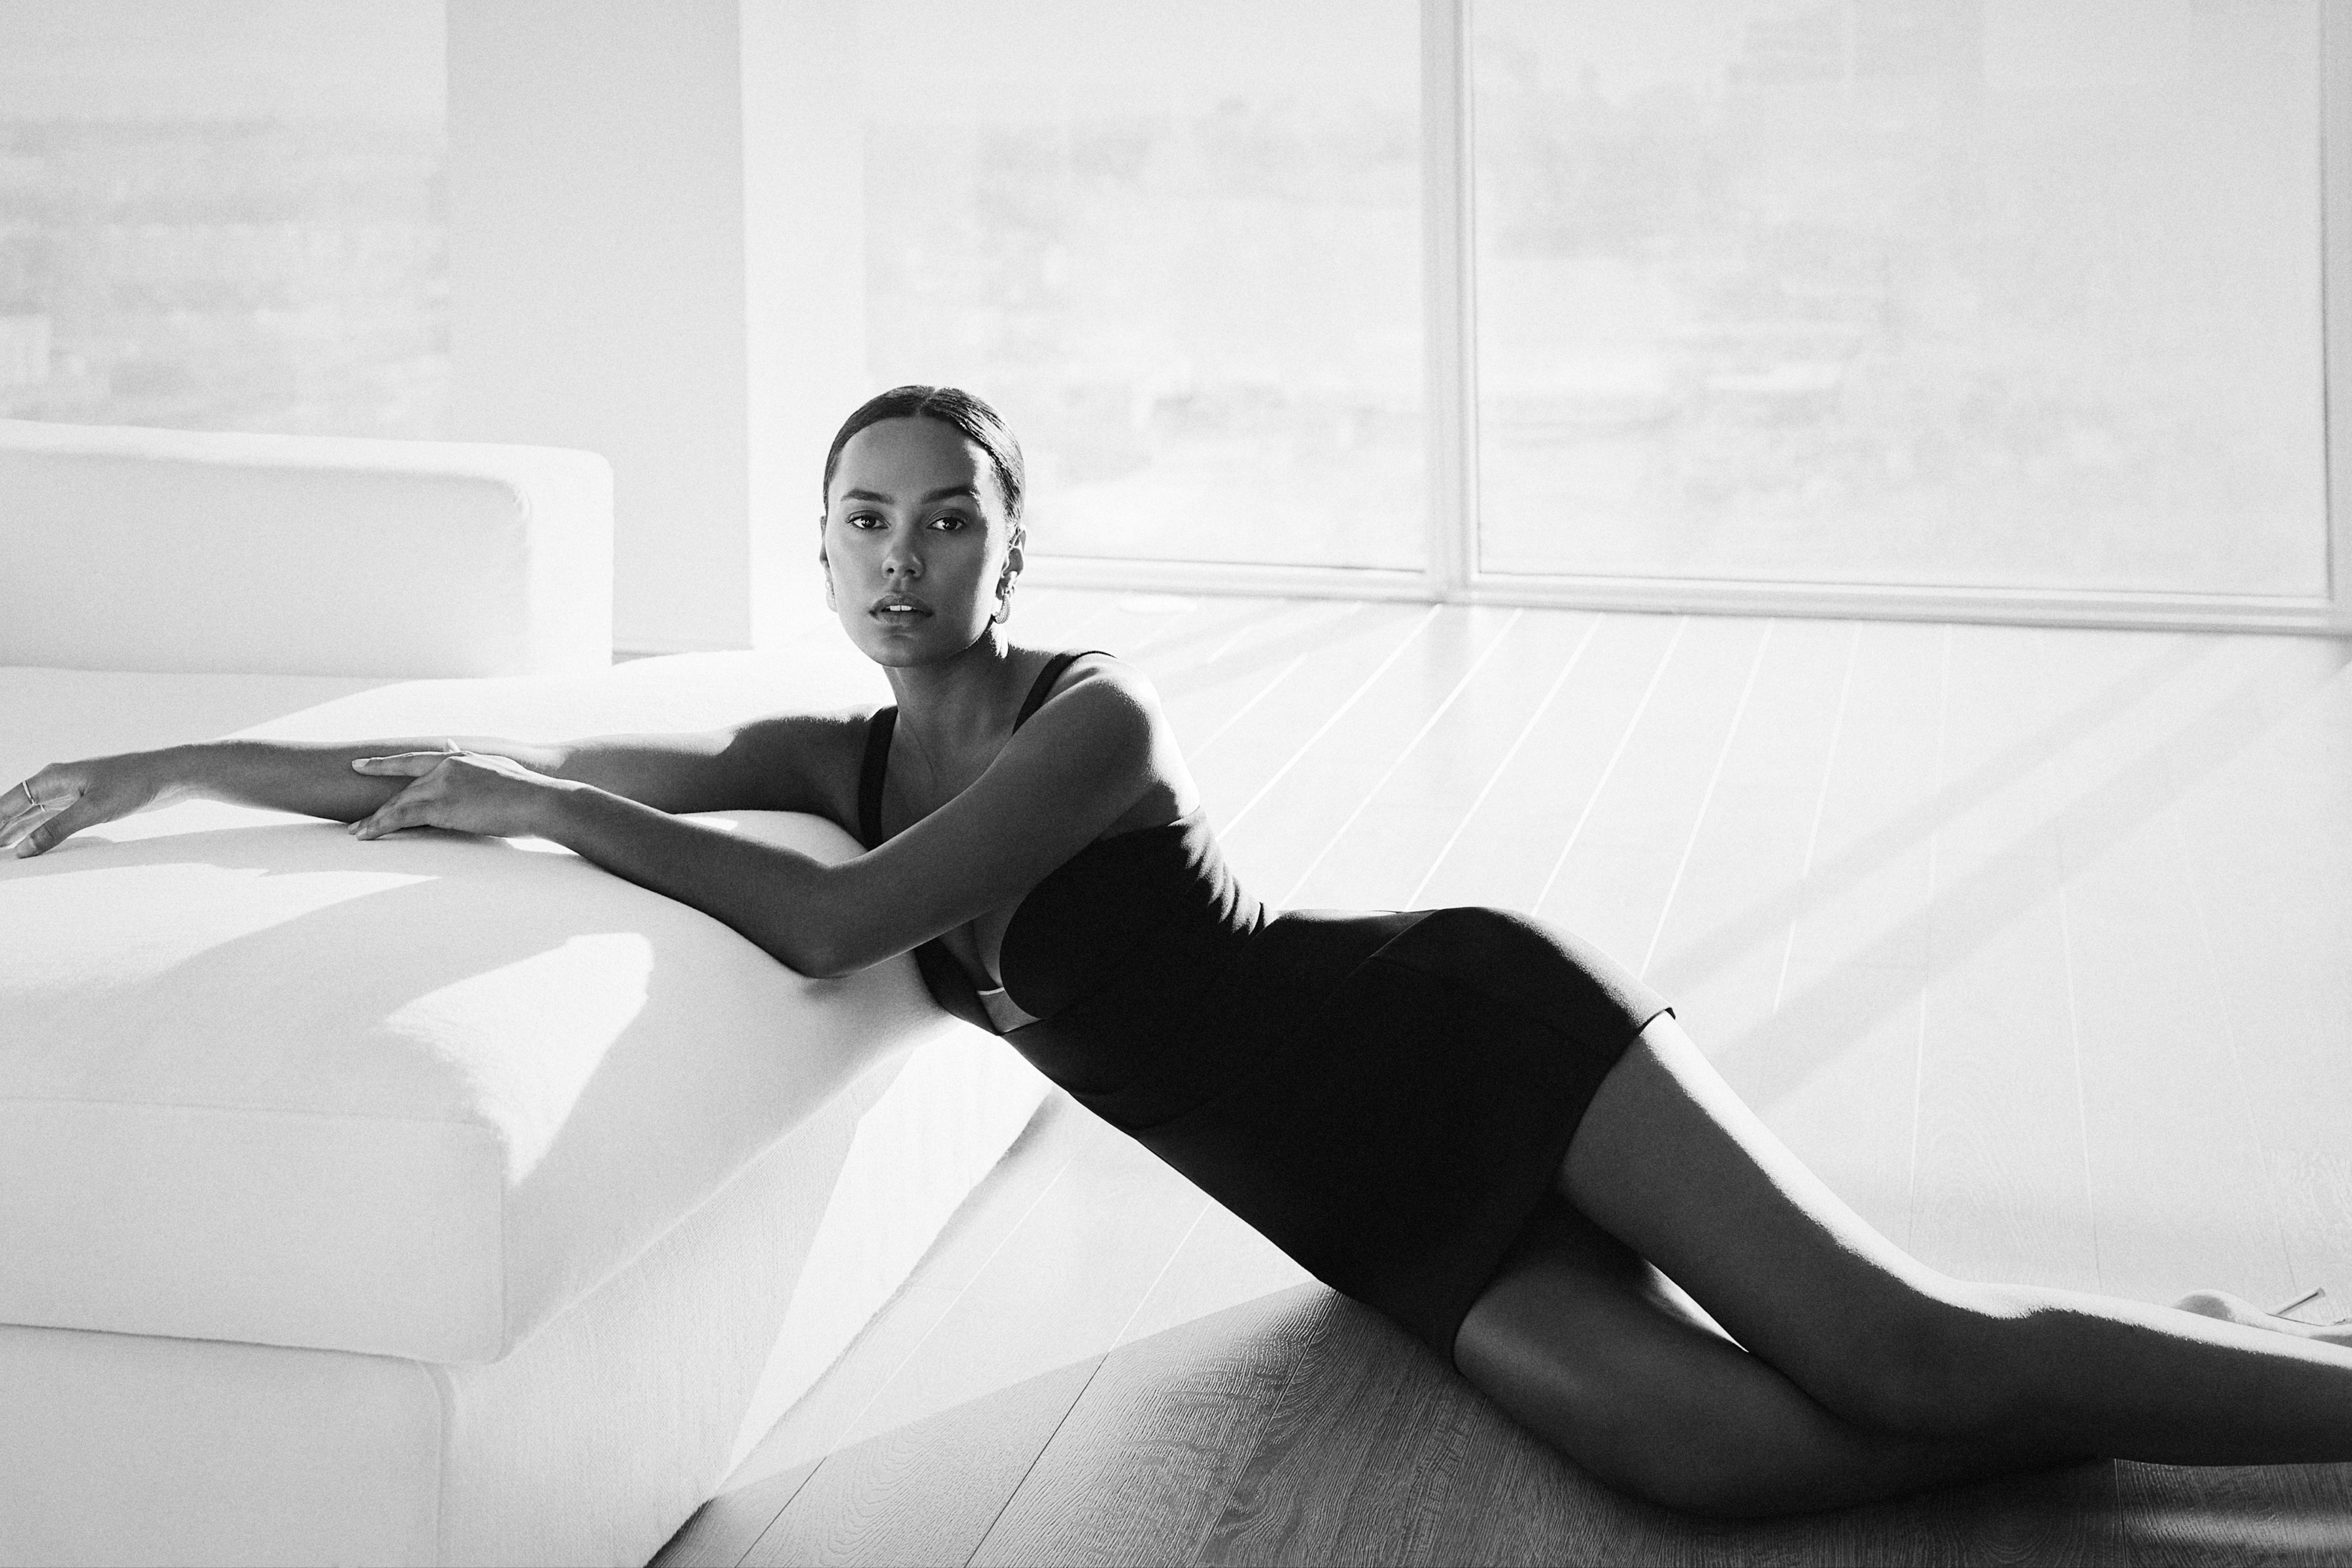 BCBGMAXAZRIA brand ambassador Ava Dash lying on the floor with her arms on a white couch in a black mini dress inside an apartment